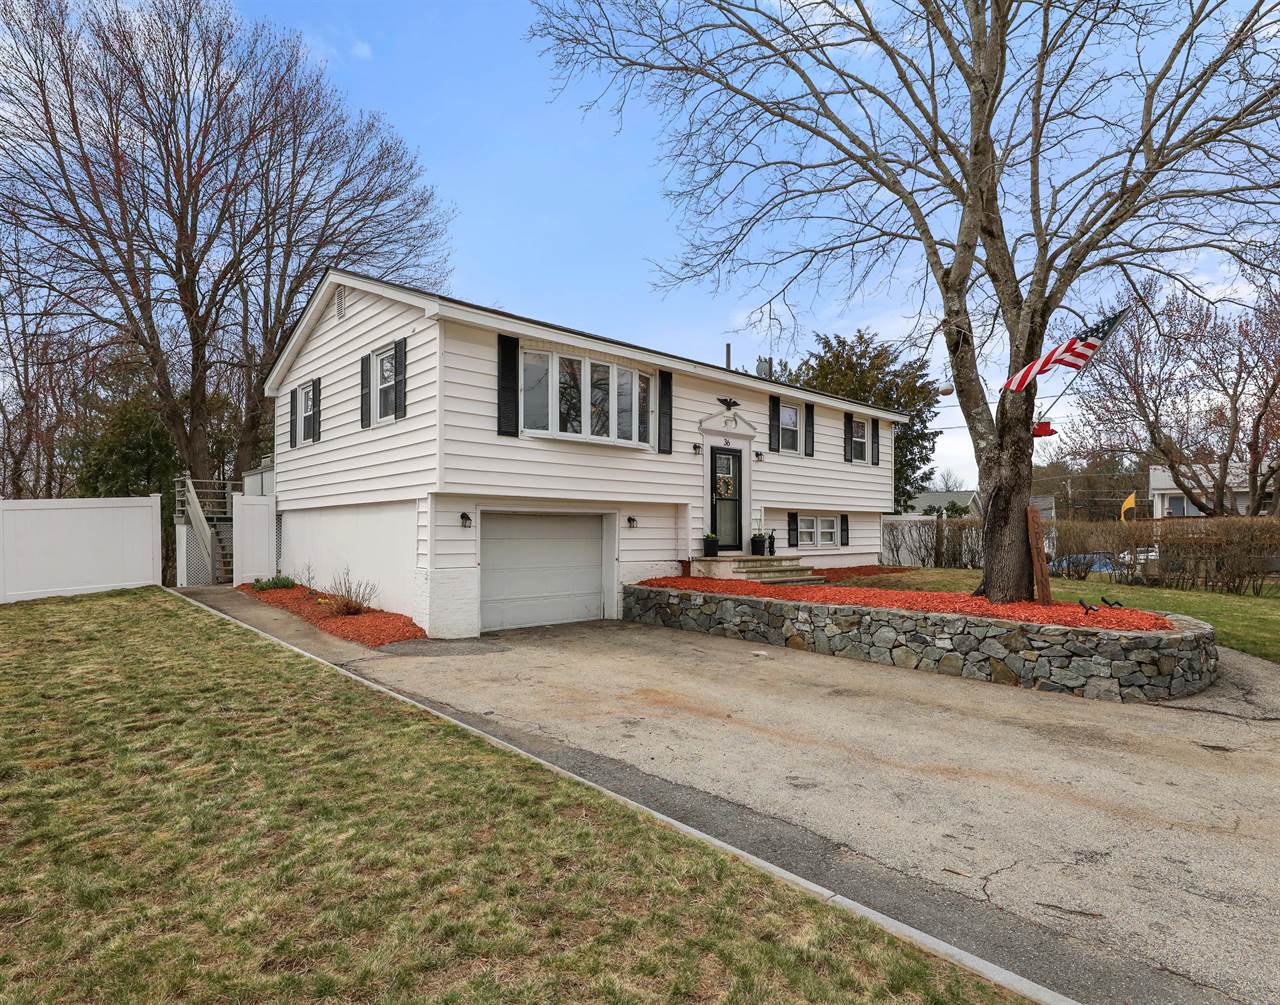 36 New Caster Dr, Lowell, MA 01854